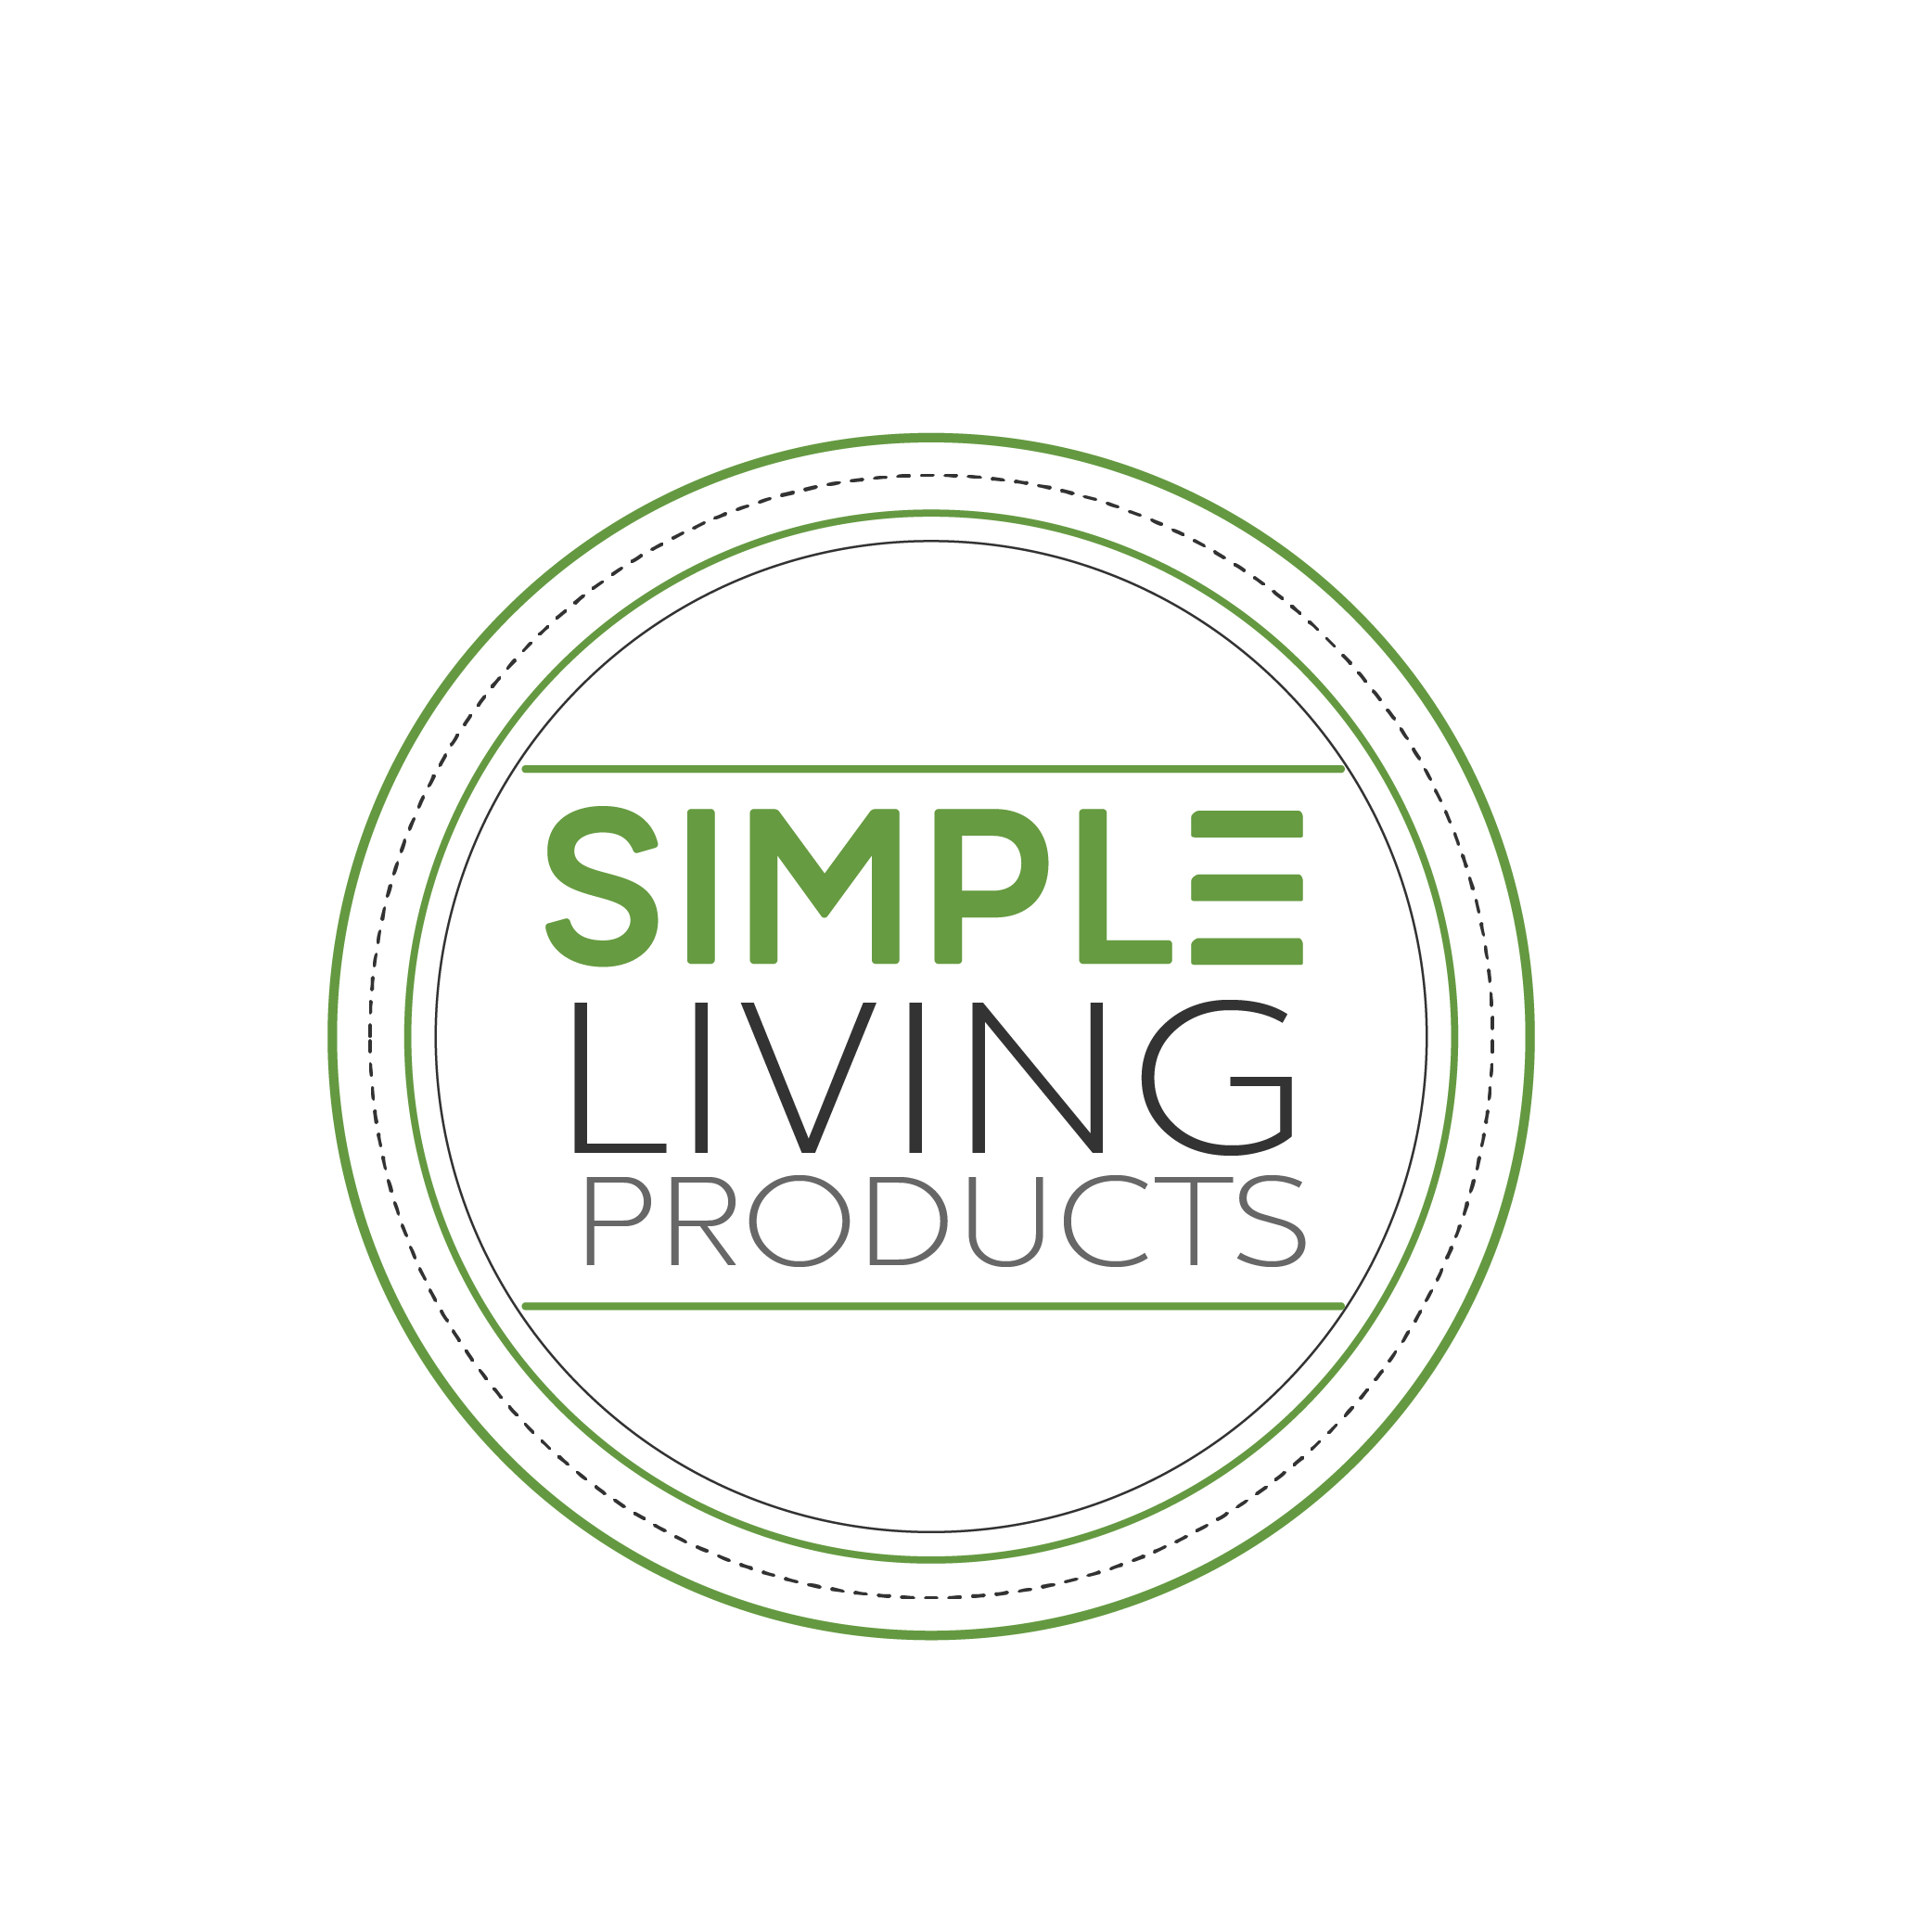 Simple Living Products logo